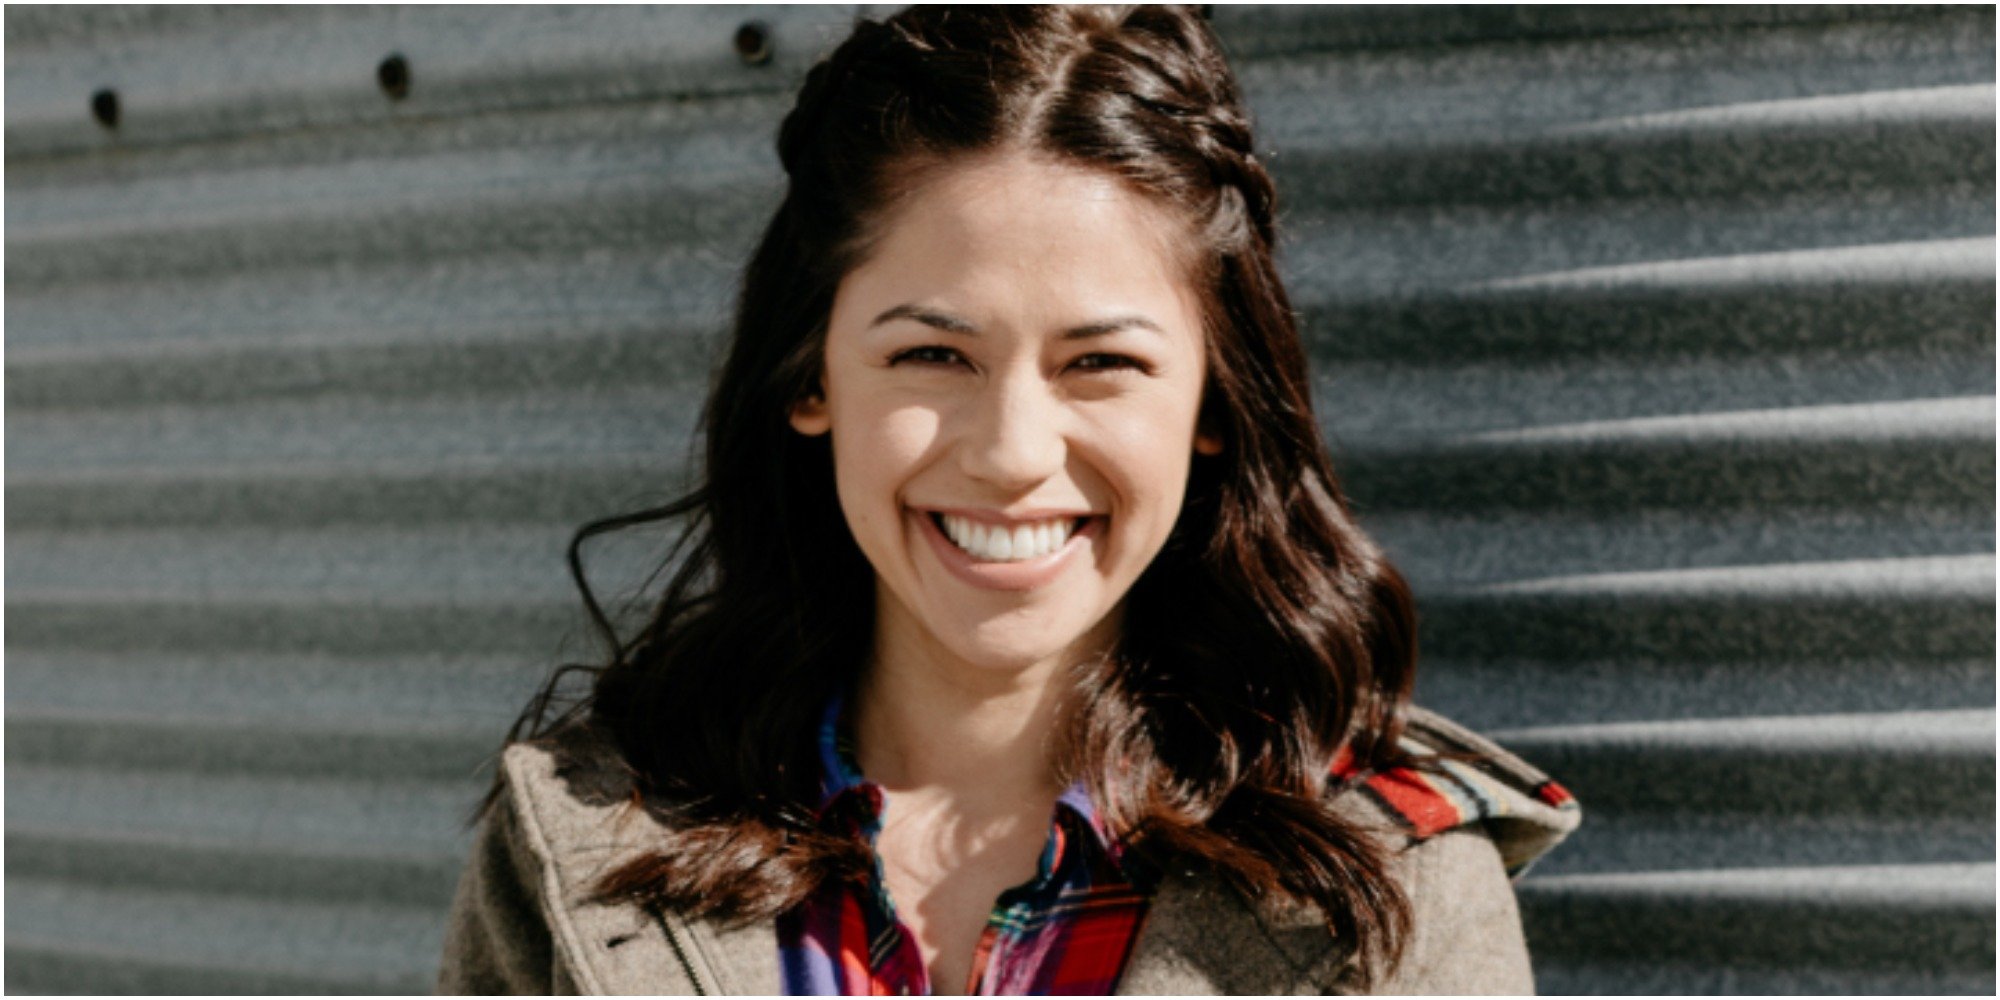 Molly Yeh smiles in a photograph, she stars in Food Network's "Girl Meets Farm."